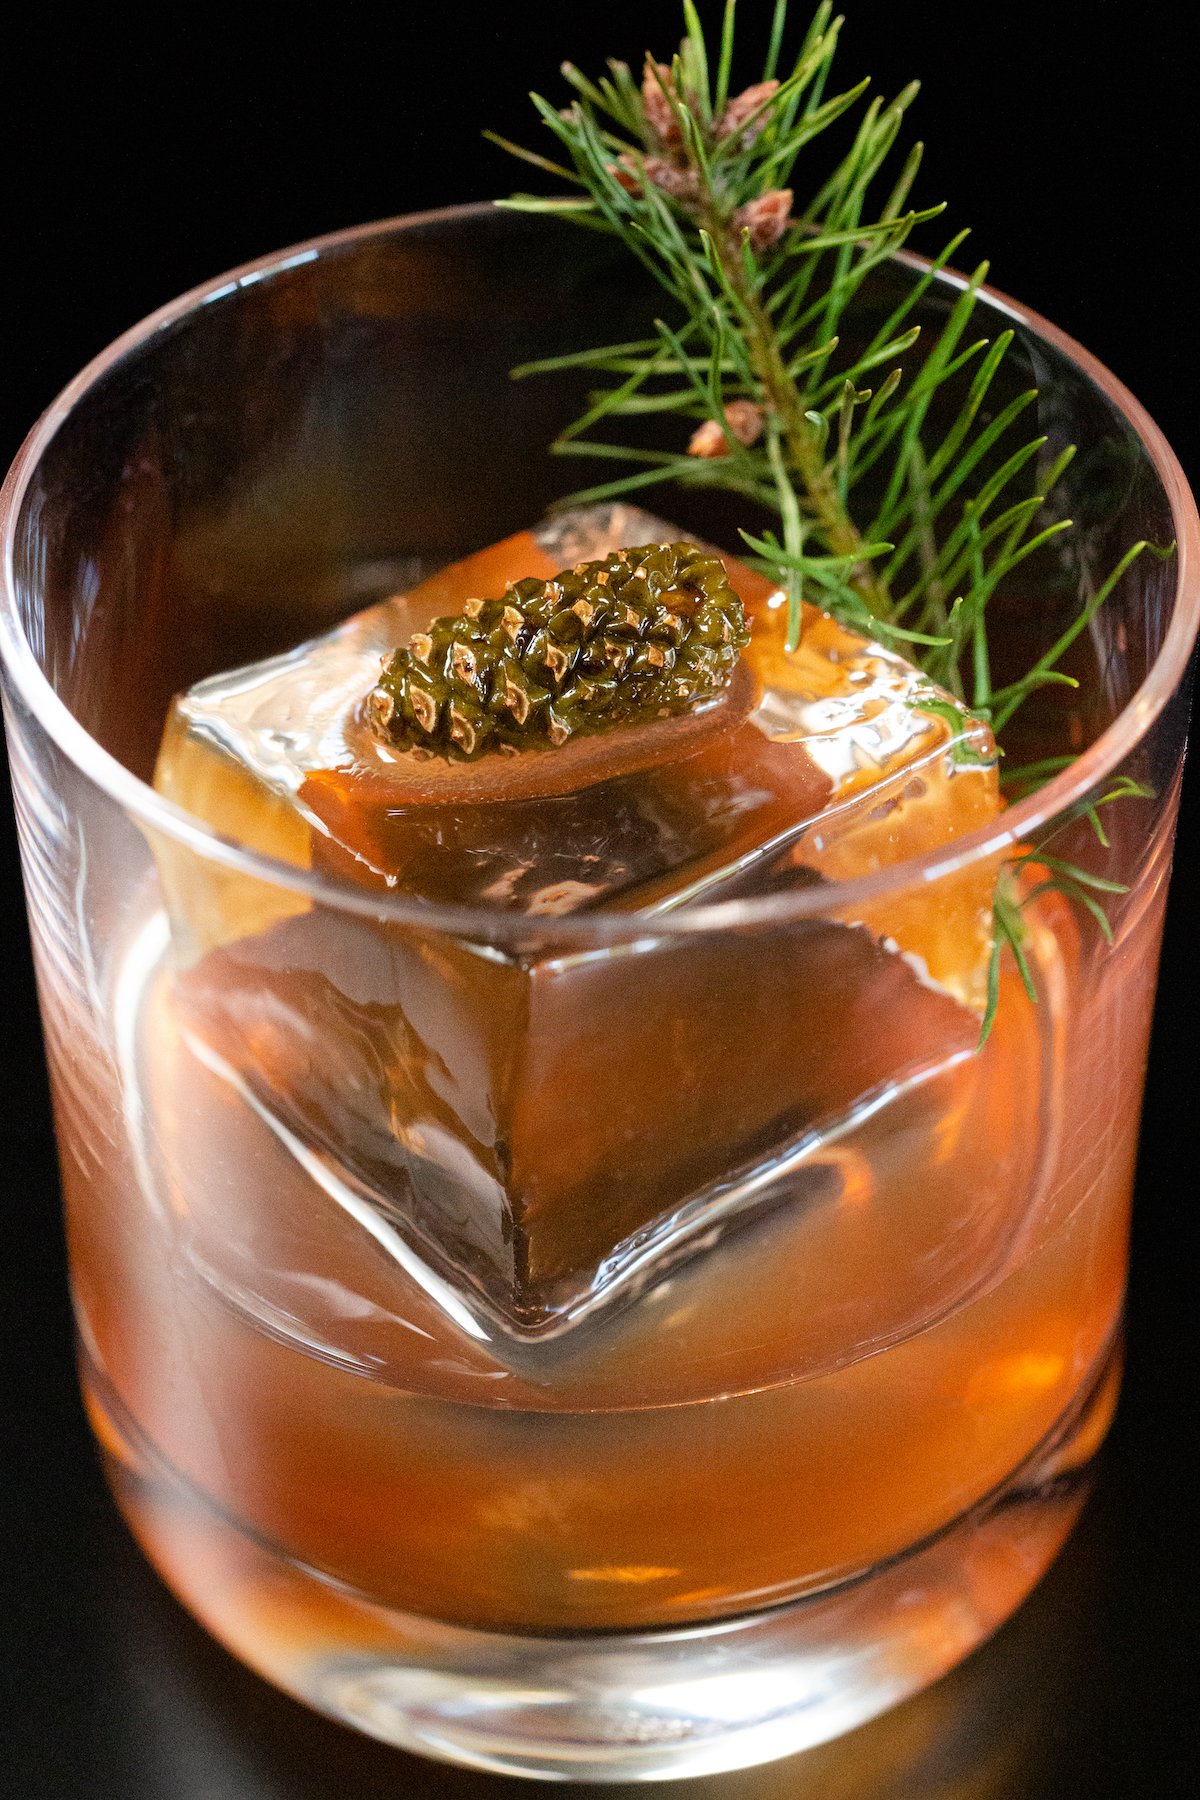 Overhead view of a lowball glass on a black background. It is filled half way with a reddish brown Christmas old fashioned liquid. It also has a large clear block of ice and a mini pine cone and small clipping from a Christmas tree as a garnish.